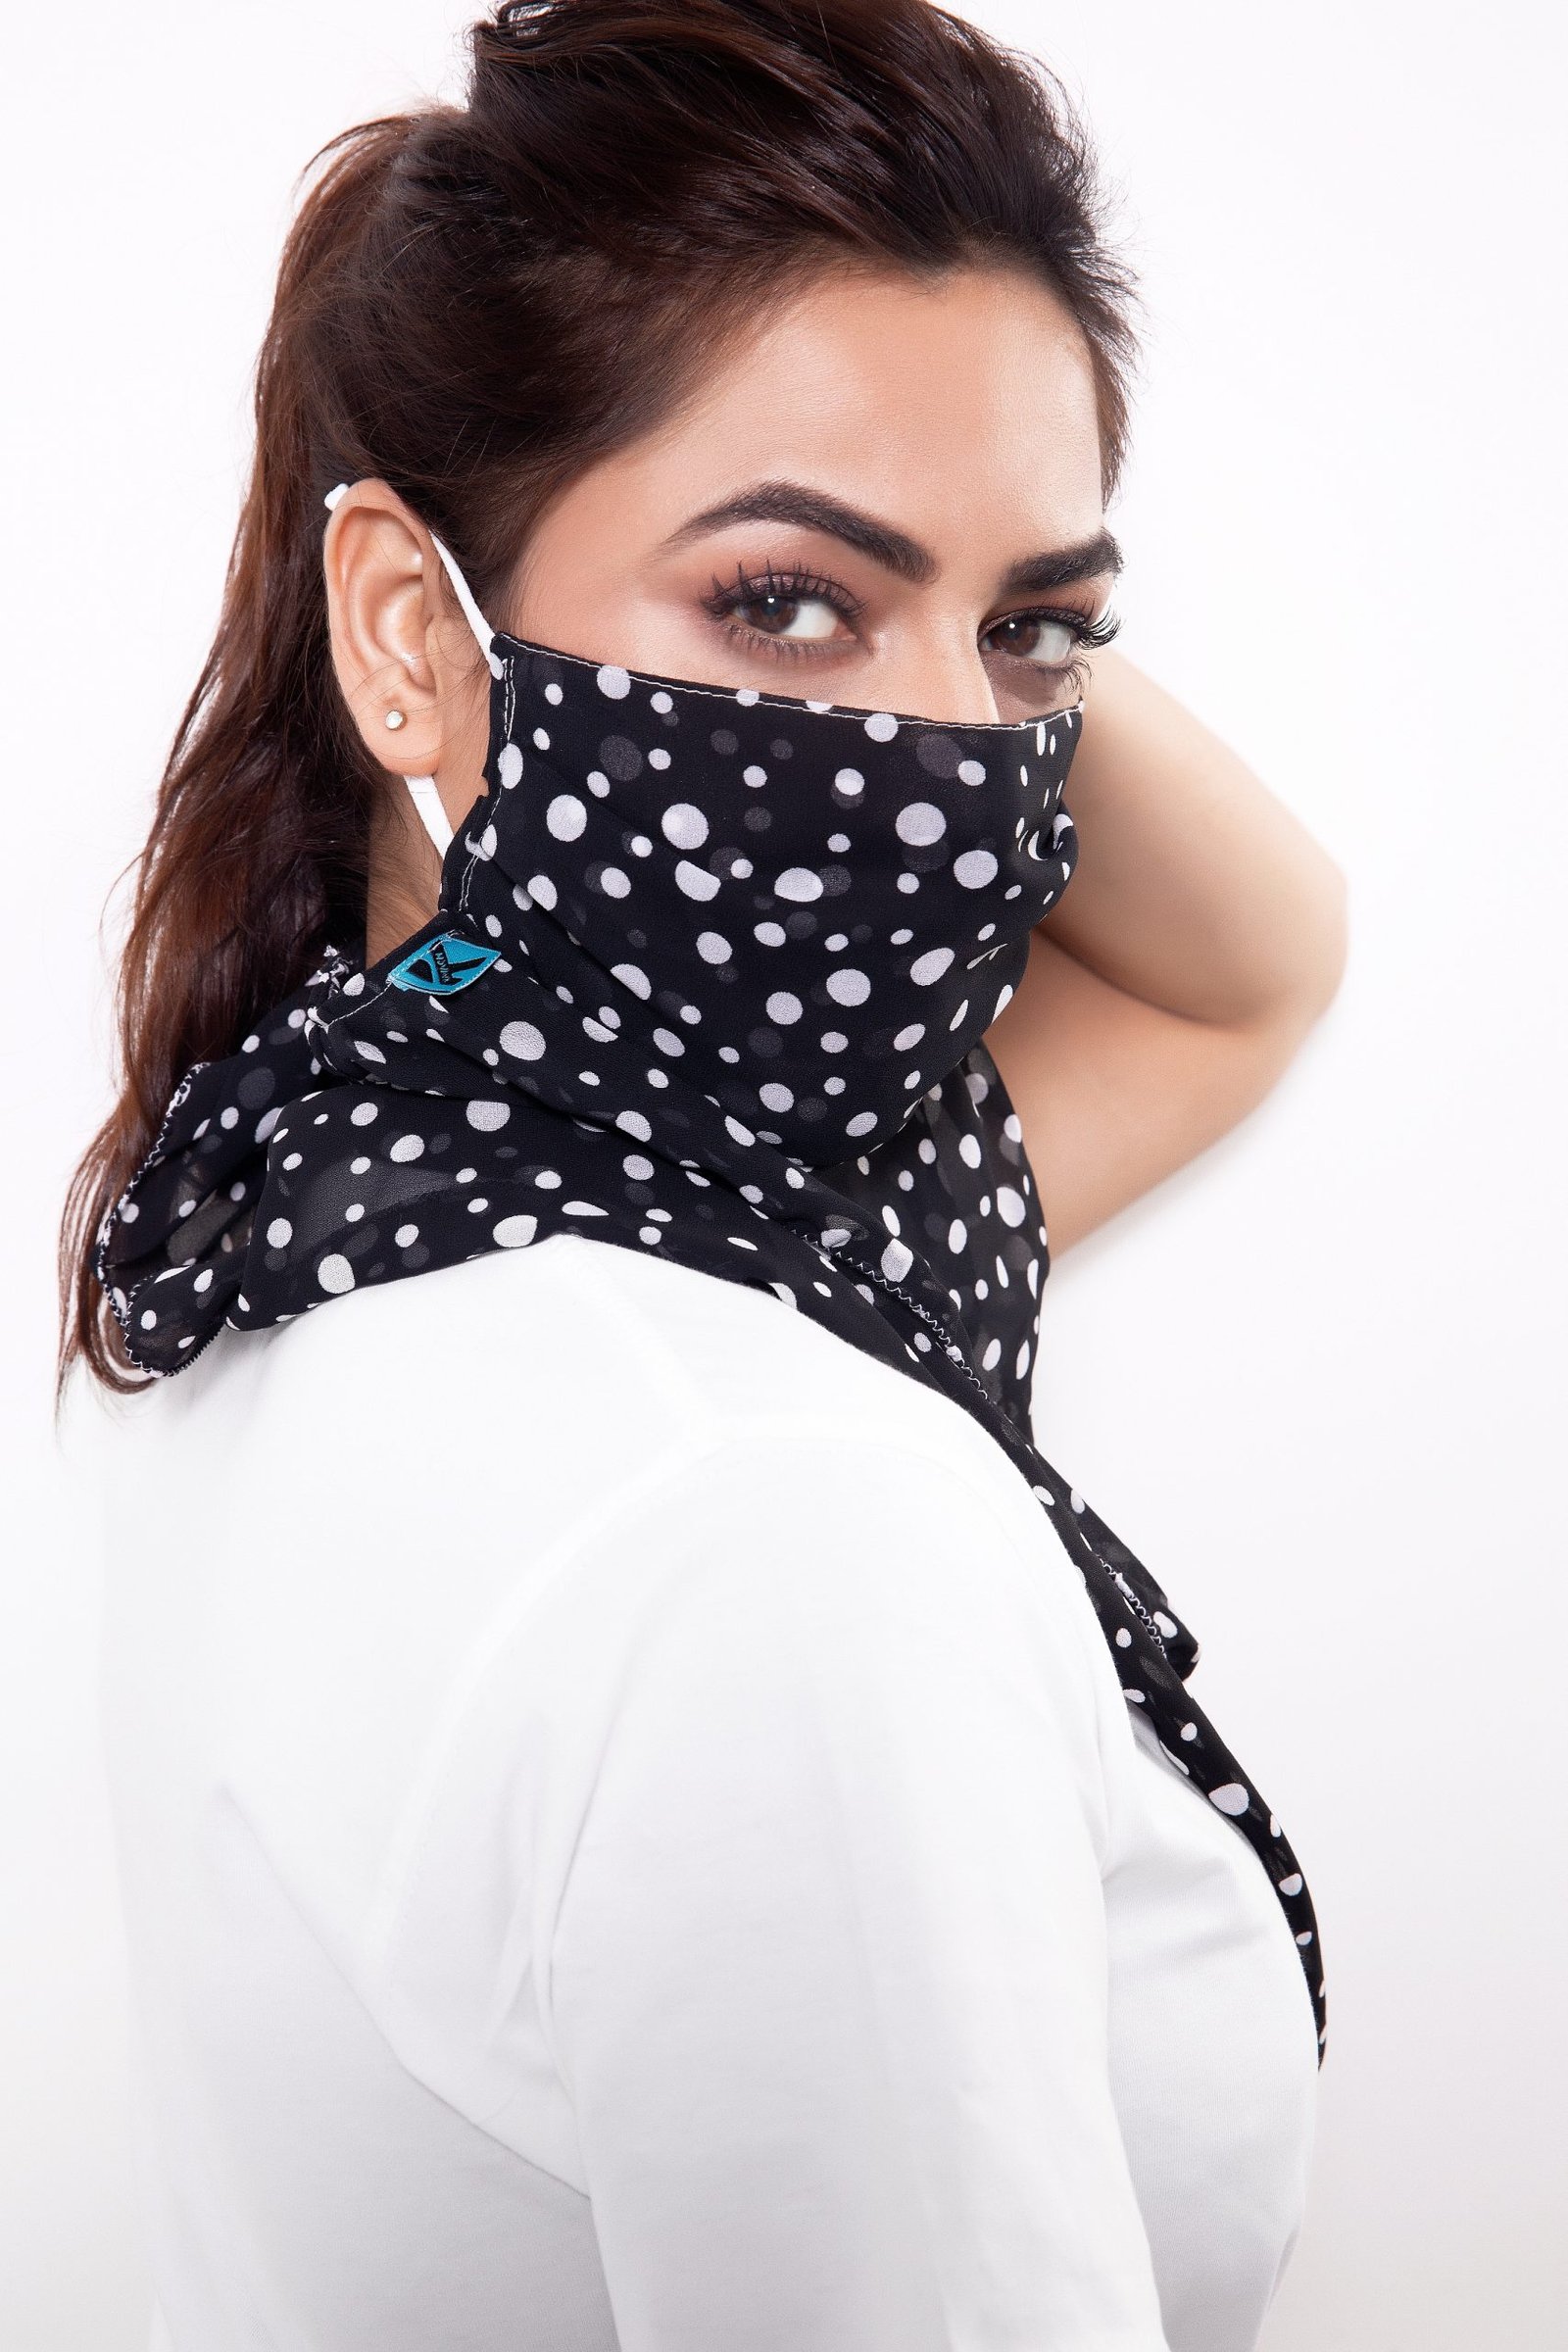 Don’t cover face with dupatta. Our full face stylish mask scarf is Ideal way to cover while riding two-wheeler. Our mask scarf protect from PM 2.5 pollution